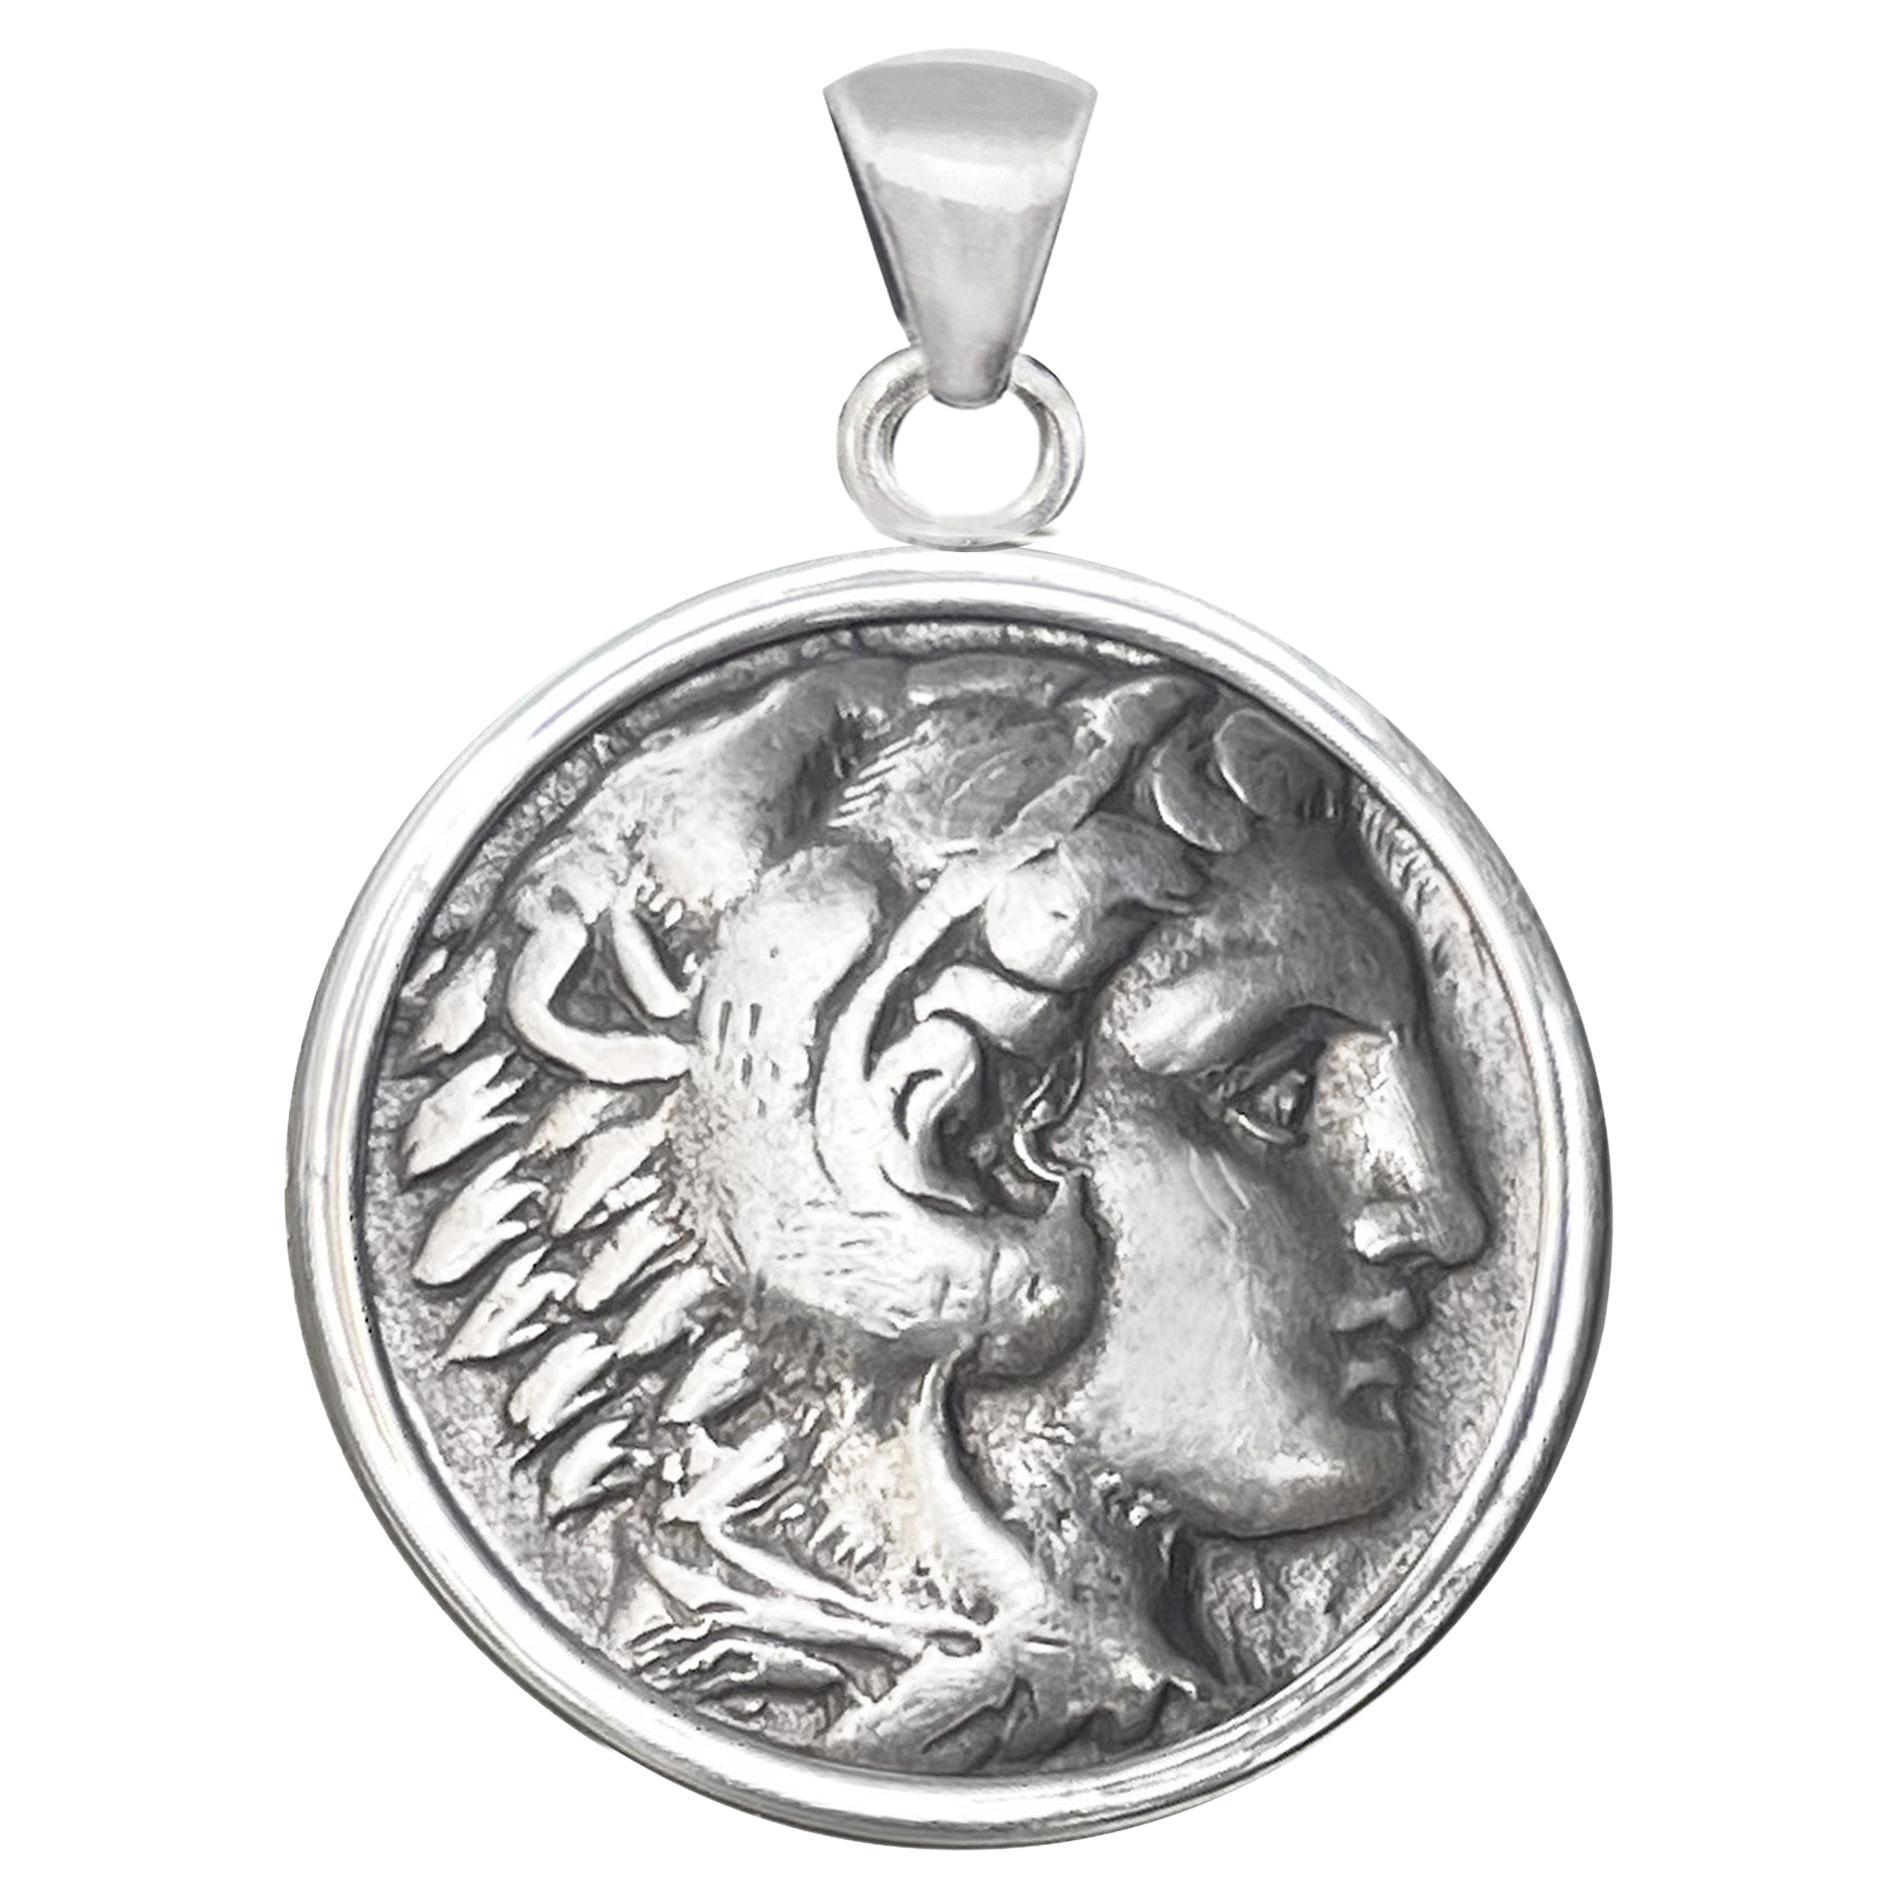 Greek Silver Coin 'IV Cent BC' Depicting Heracles Sterling Silver Pendant